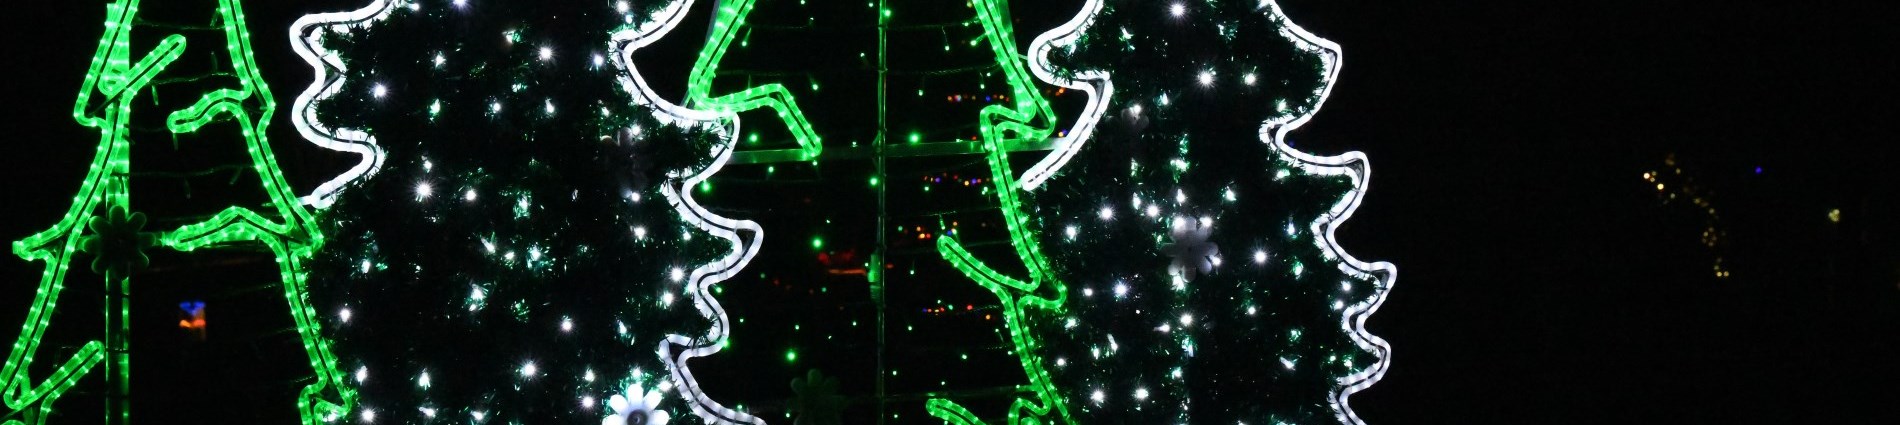 Photo of Festival of Lights Display with Green and White Trees